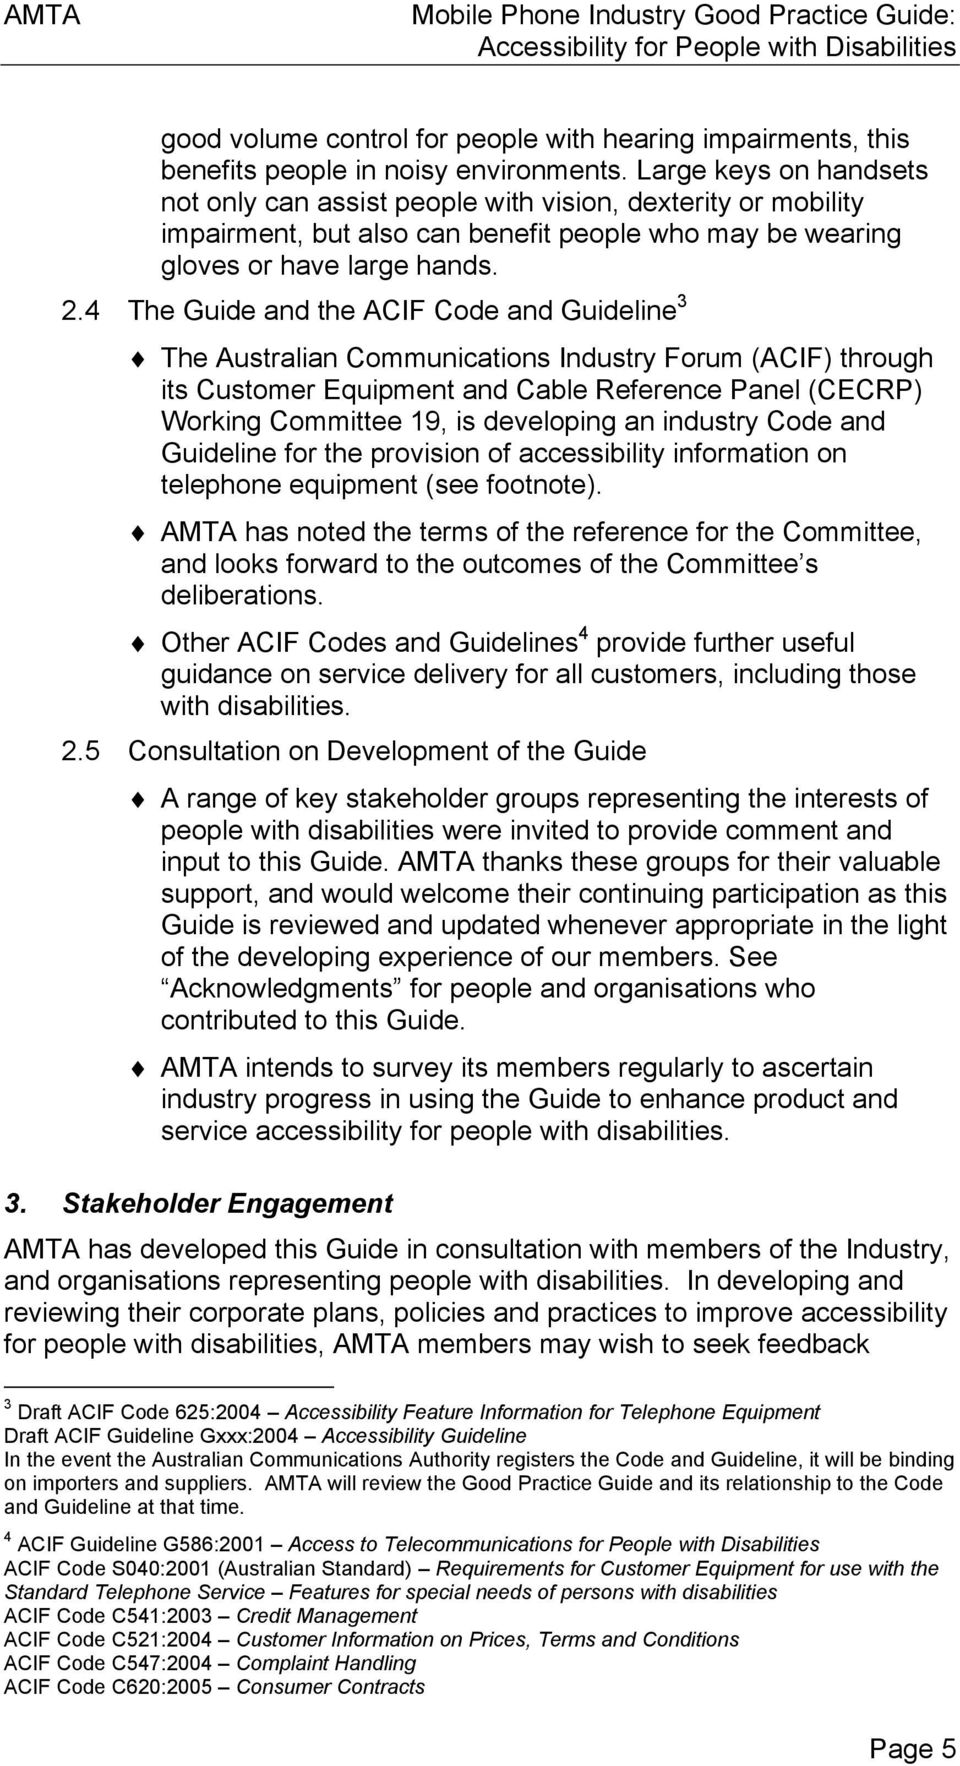 4 The Guide and the ACIF Code and Guideline 3 The Australian Communications Industry Forum (ACIF) through its Customer Equipment and Cable Reference Panel (CECRP) Working Committee 19, is developing